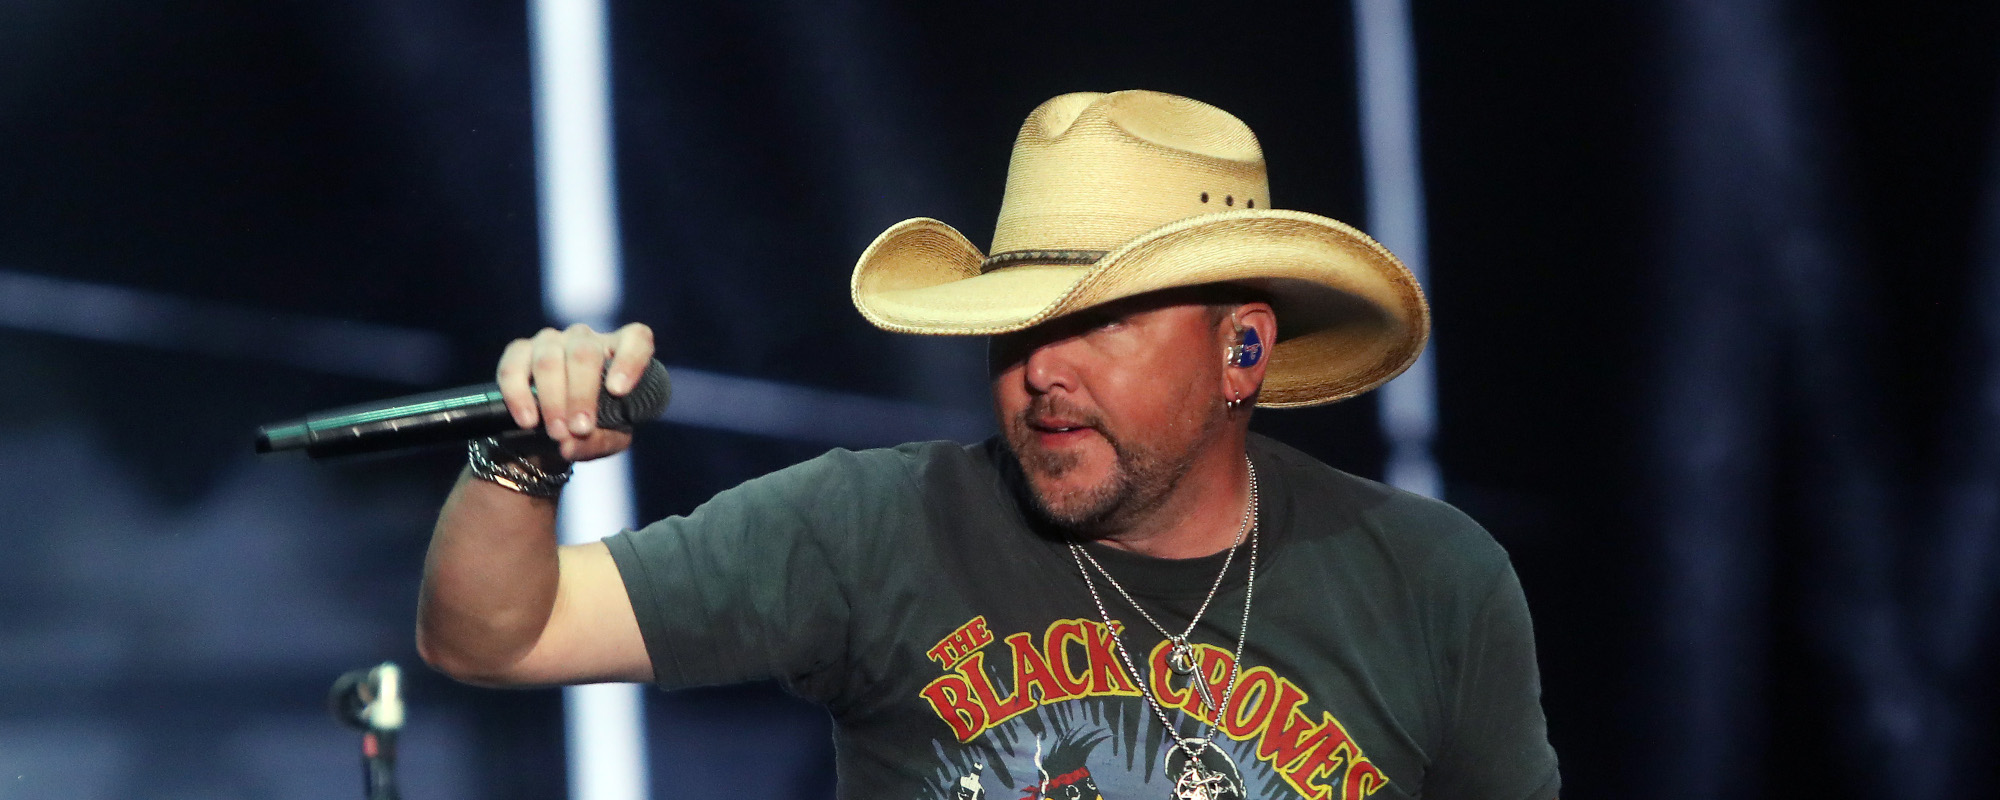 CMT Pulls Jason Aldean’s “Try That in a Small Town” Video After Backlash